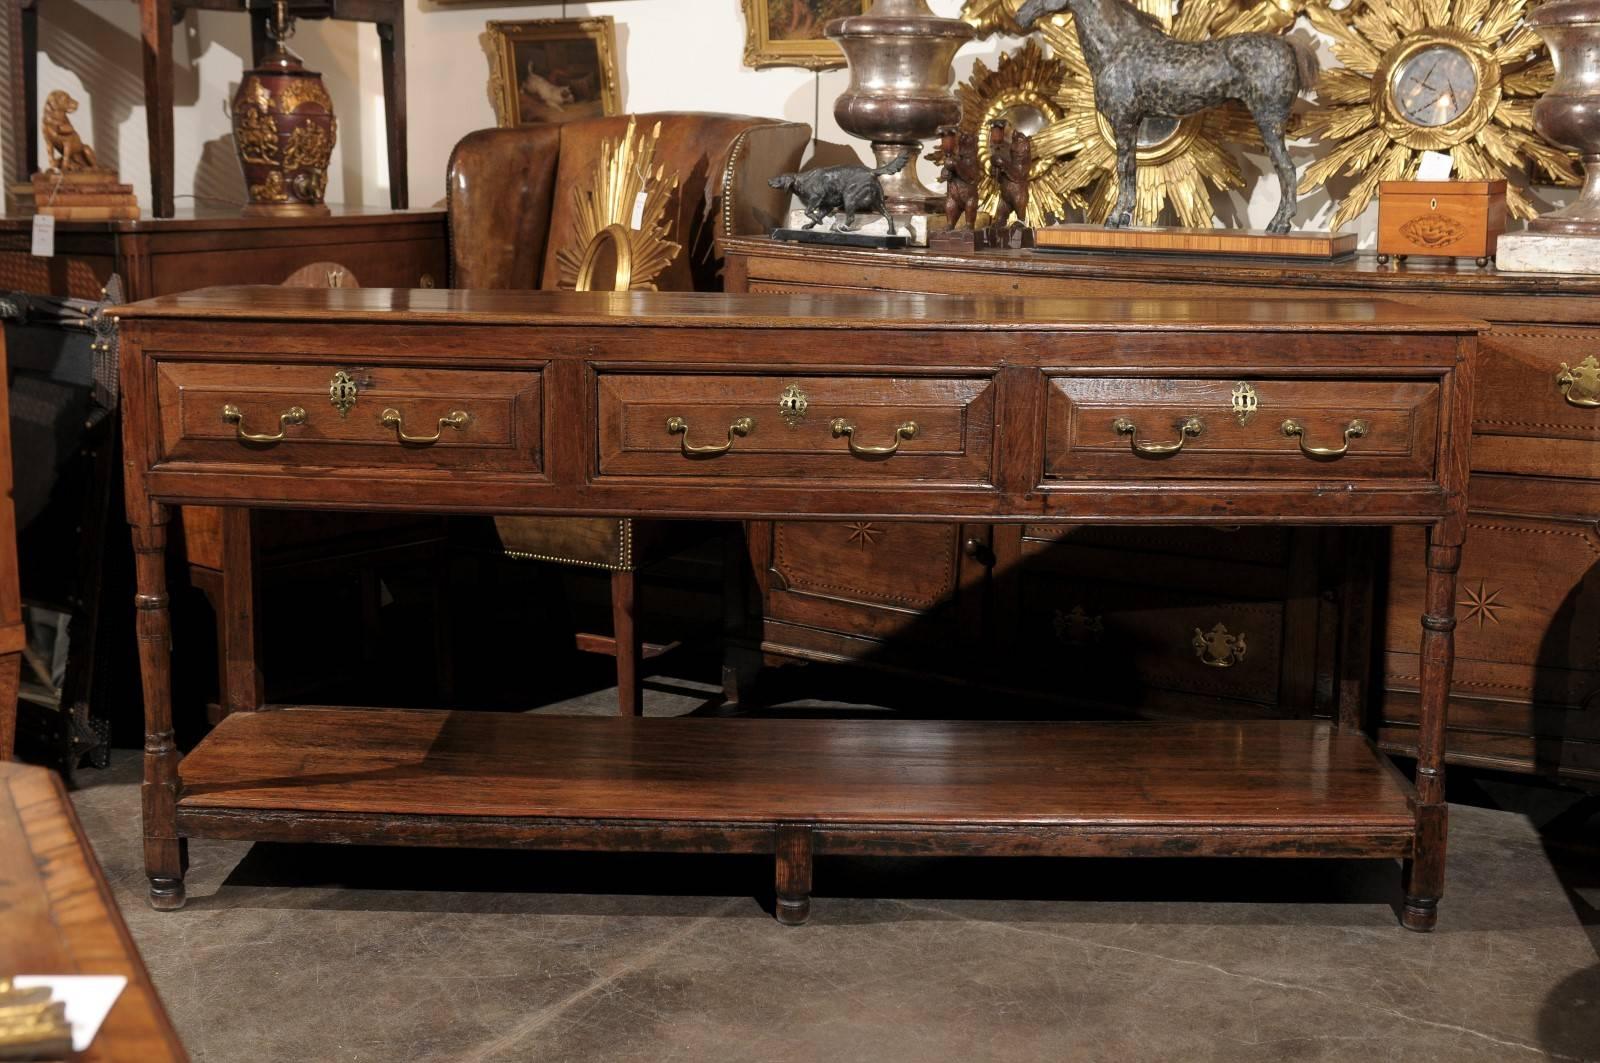 An English Georgian Oak Dresser Base from the early 1800s.  This 19th English Georgian oak dresser base features a rectangular top over three field paneled front drawers, each with two elegant brass swan neck handles flanking a nicely-shaped